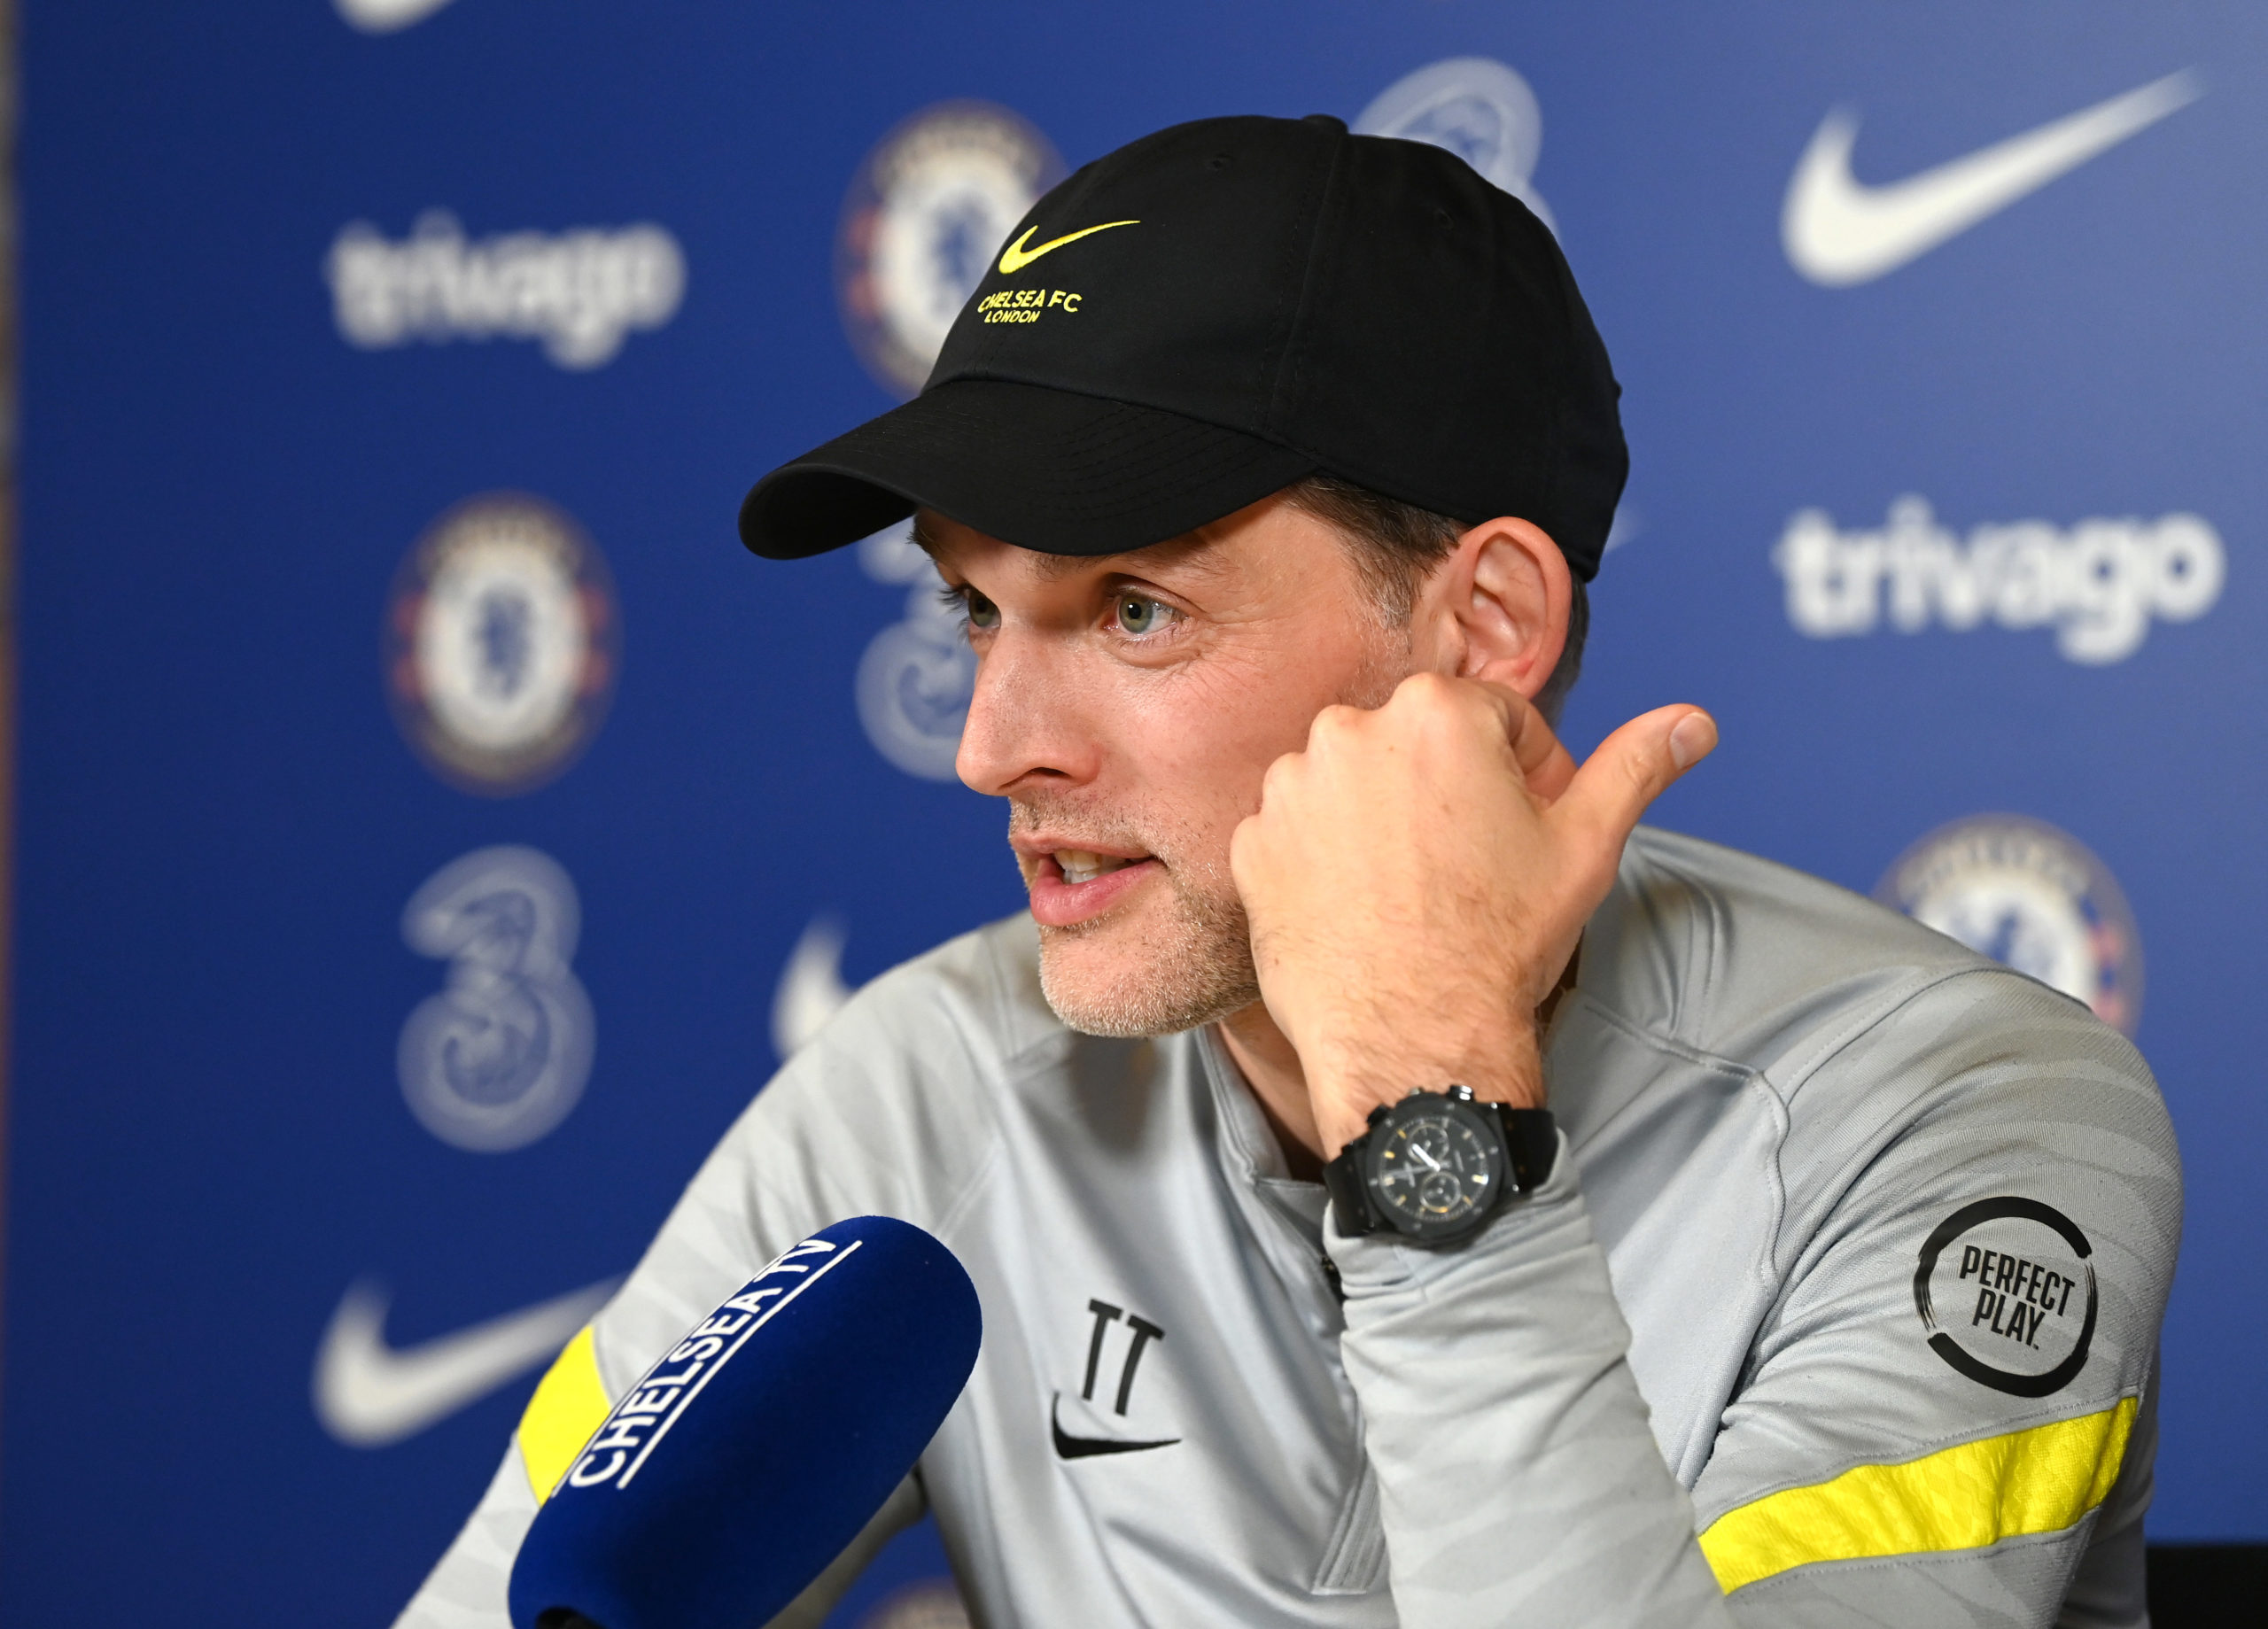 Report: Tuchel could put exciting 18-year-old Chelsea prospect into his first-team next season way ahead of schedule